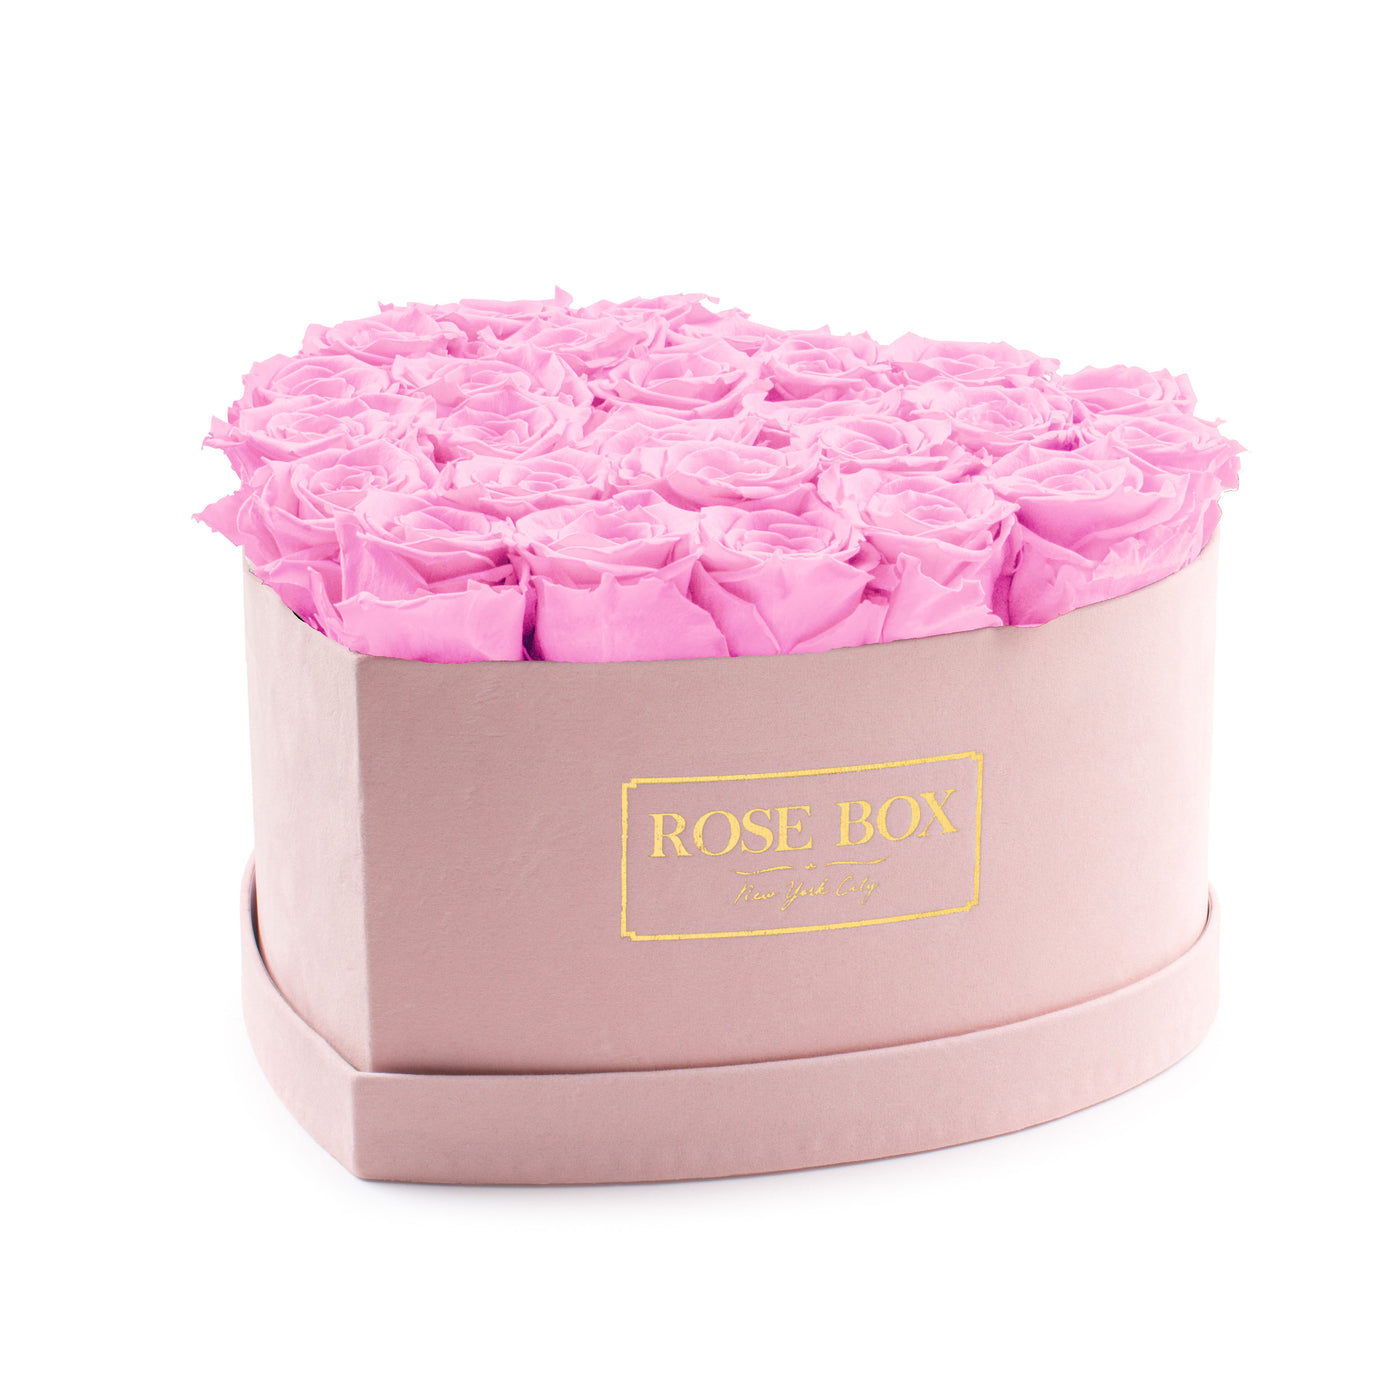 Large Pink Heart Box with Pink Blush Roses